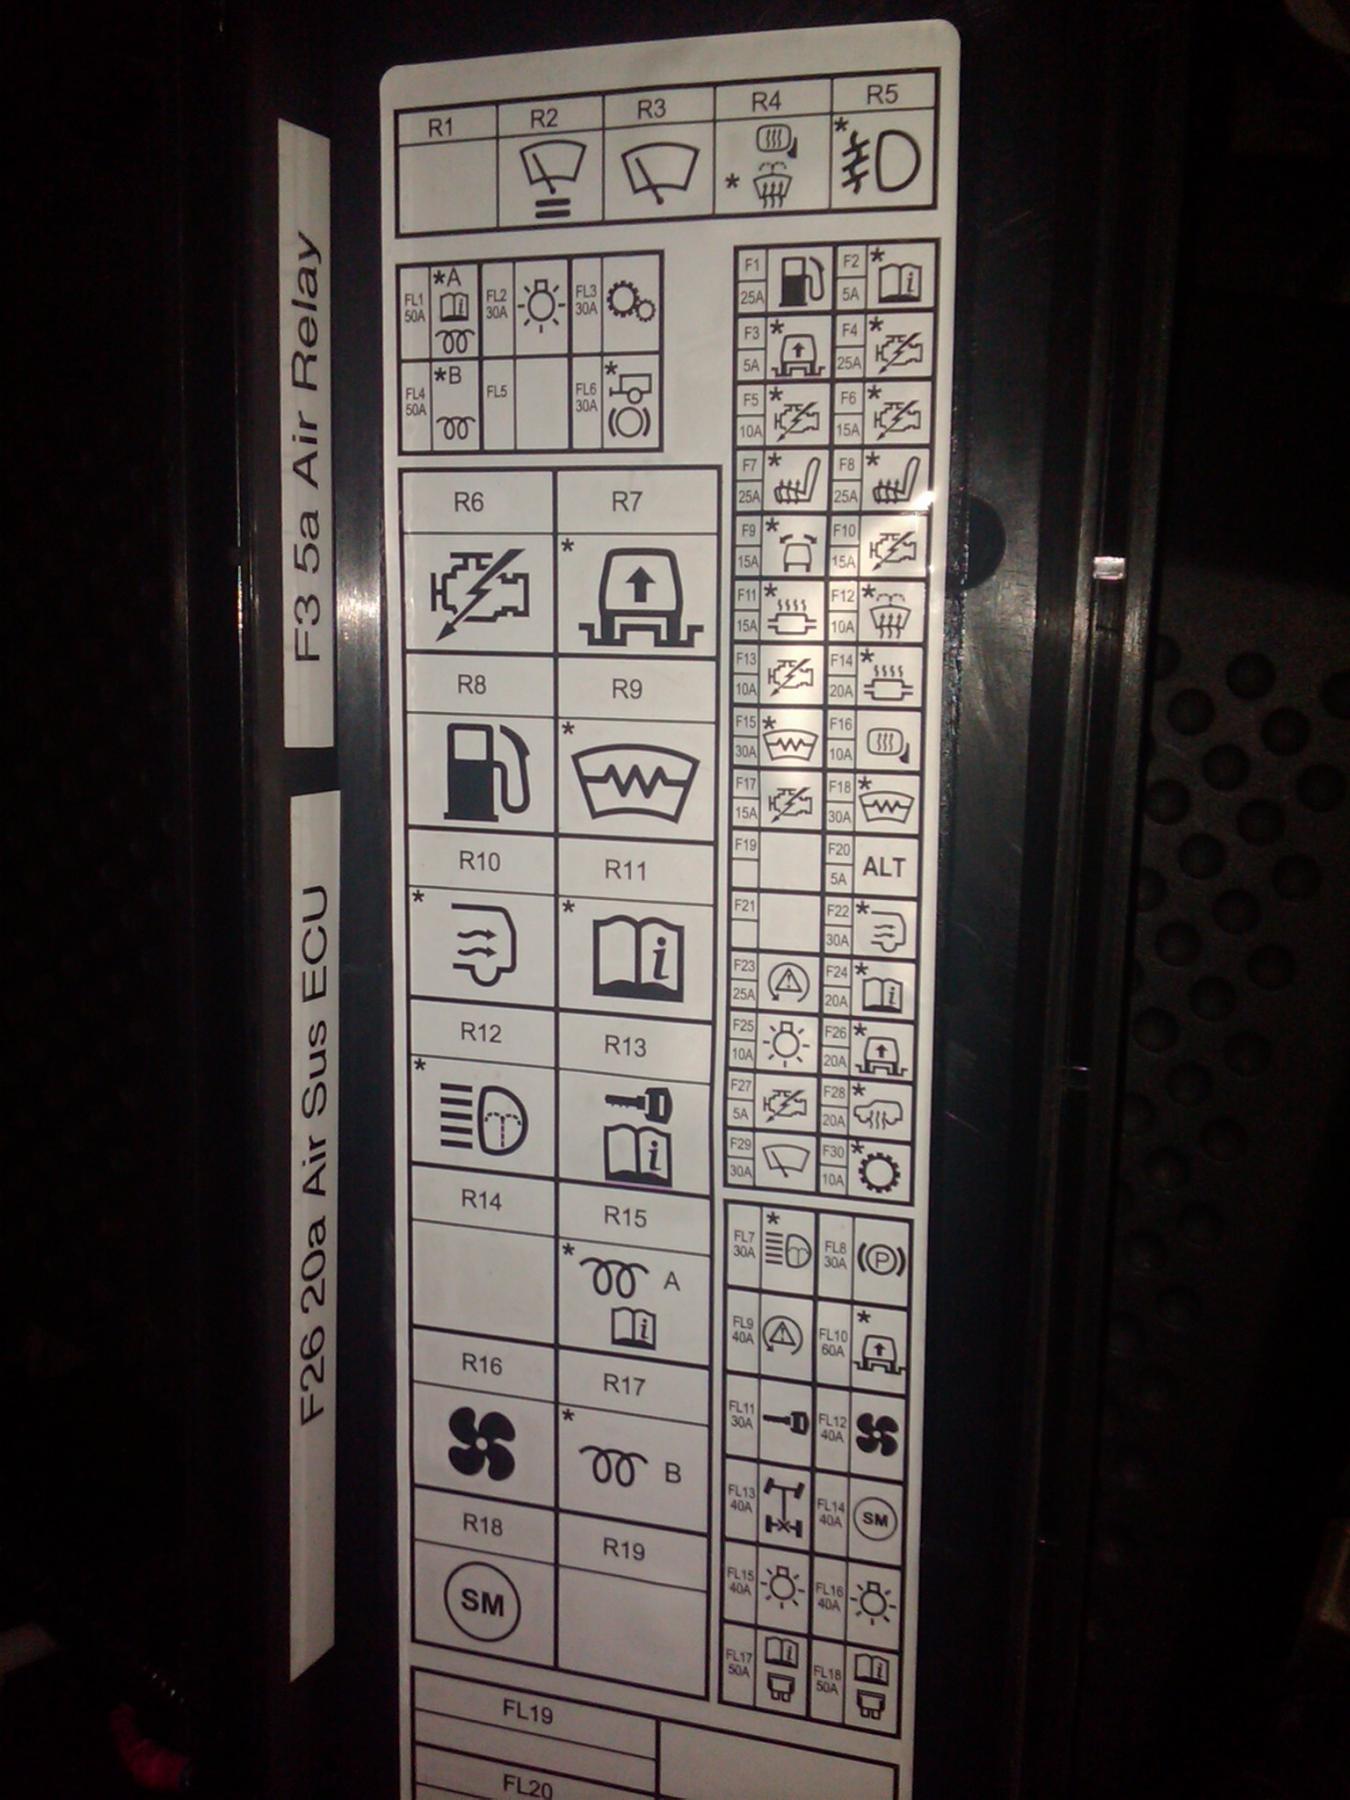 Lee Heated Seat LR3 question - Land Rover Forums - Land ...